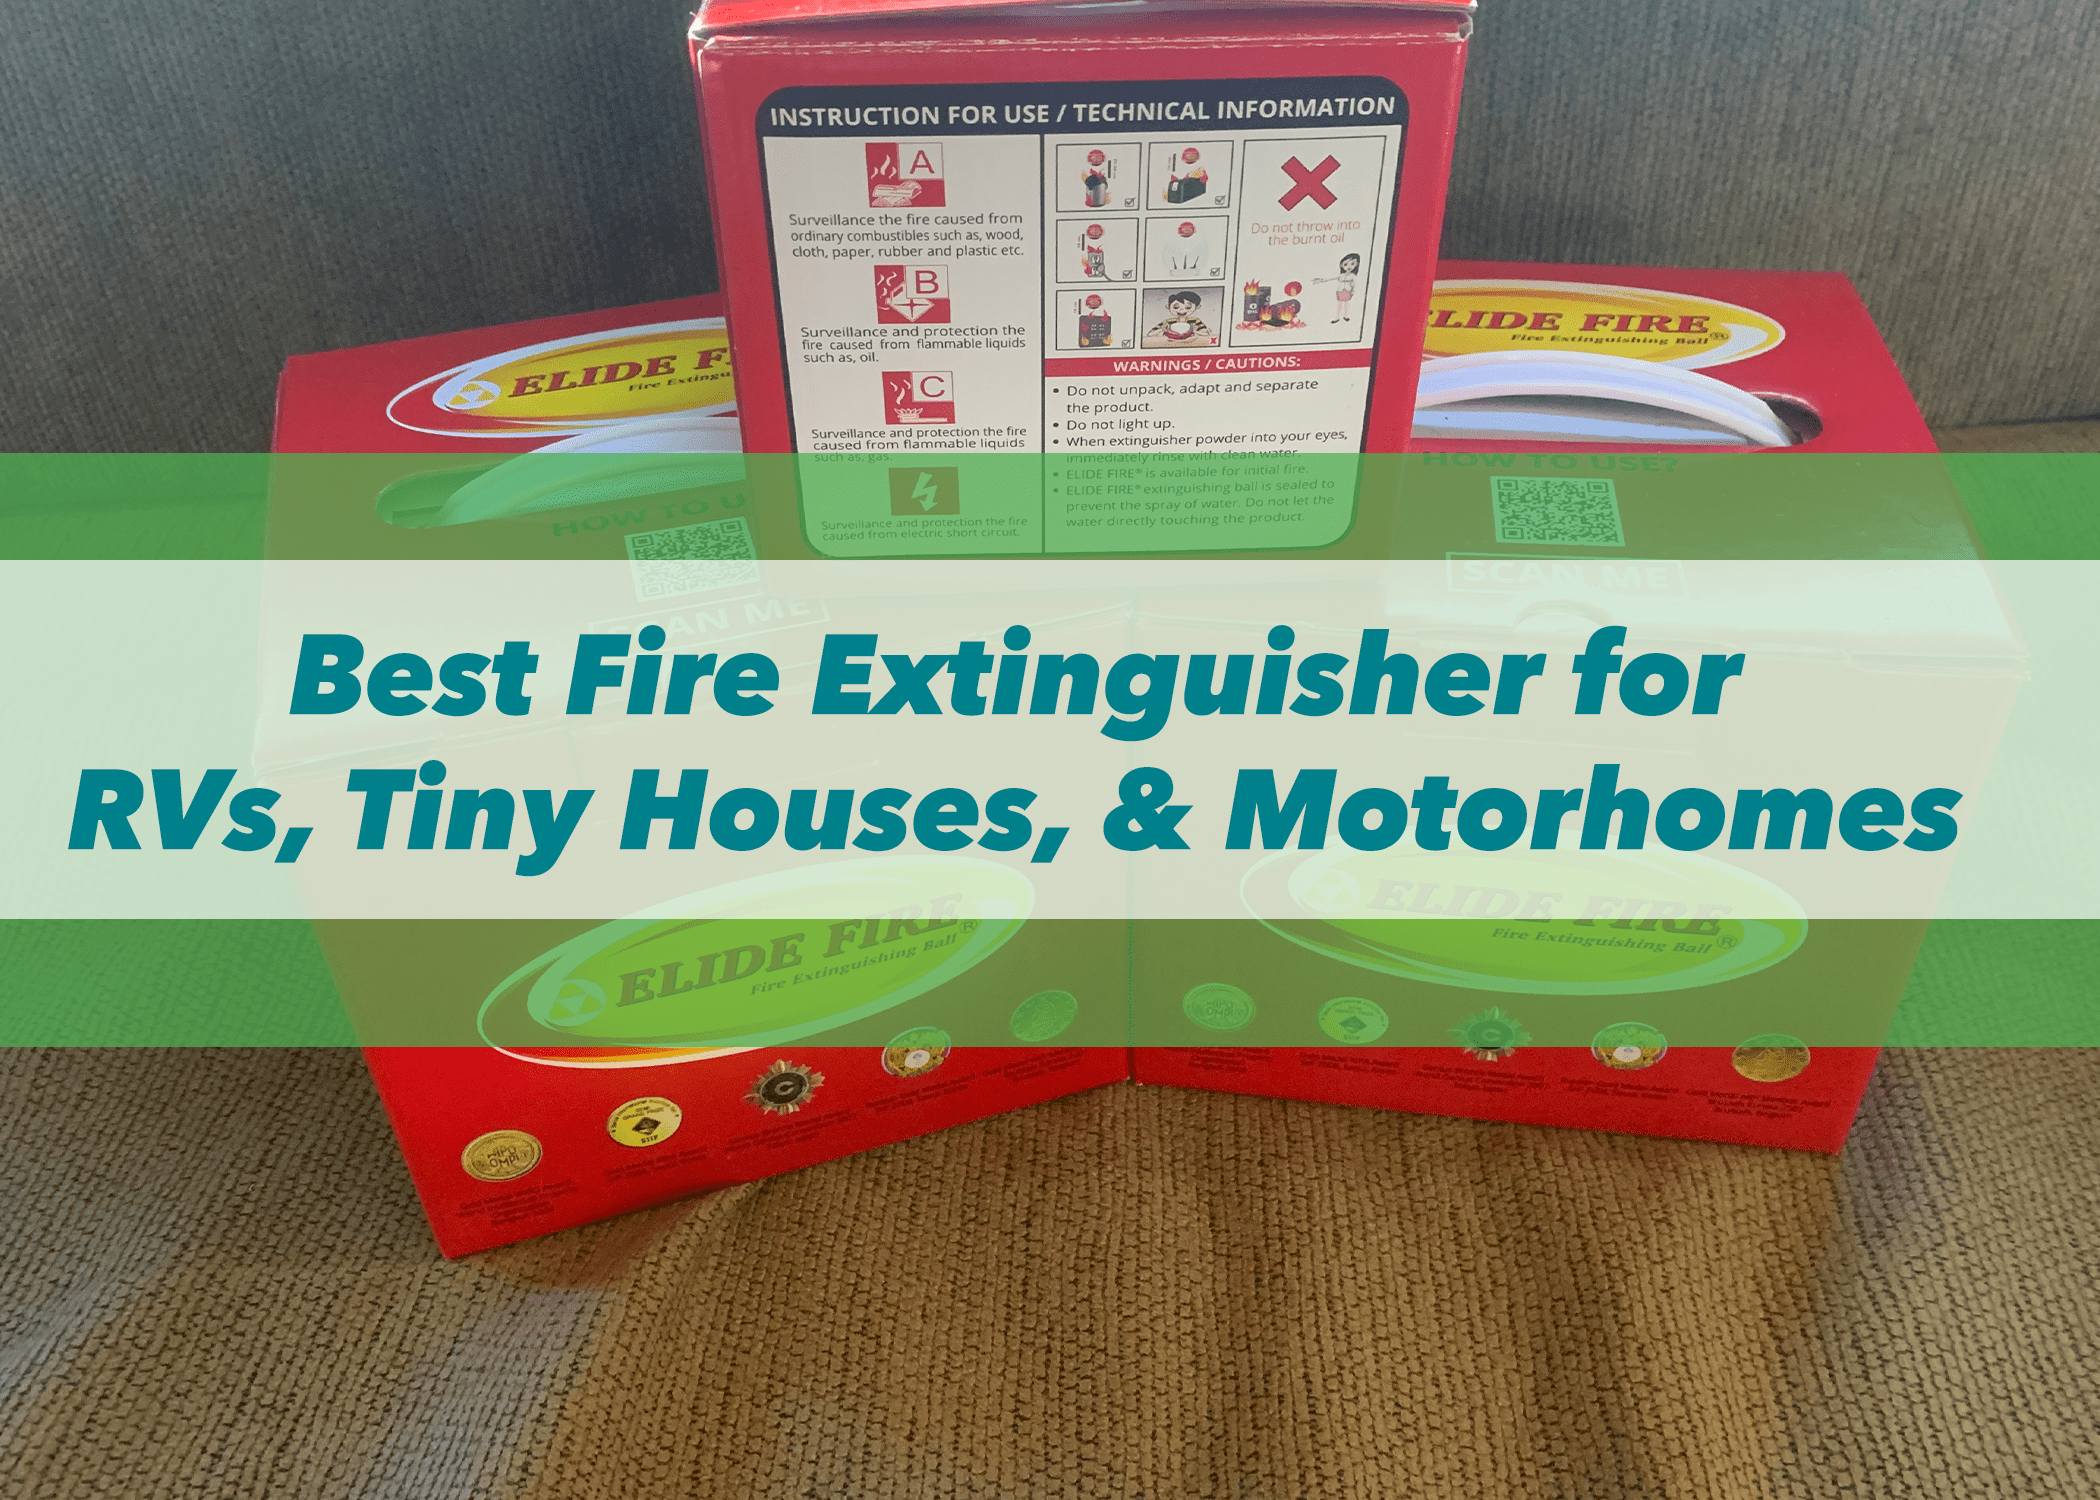 Best Fire Extinguisher for Motorhomes